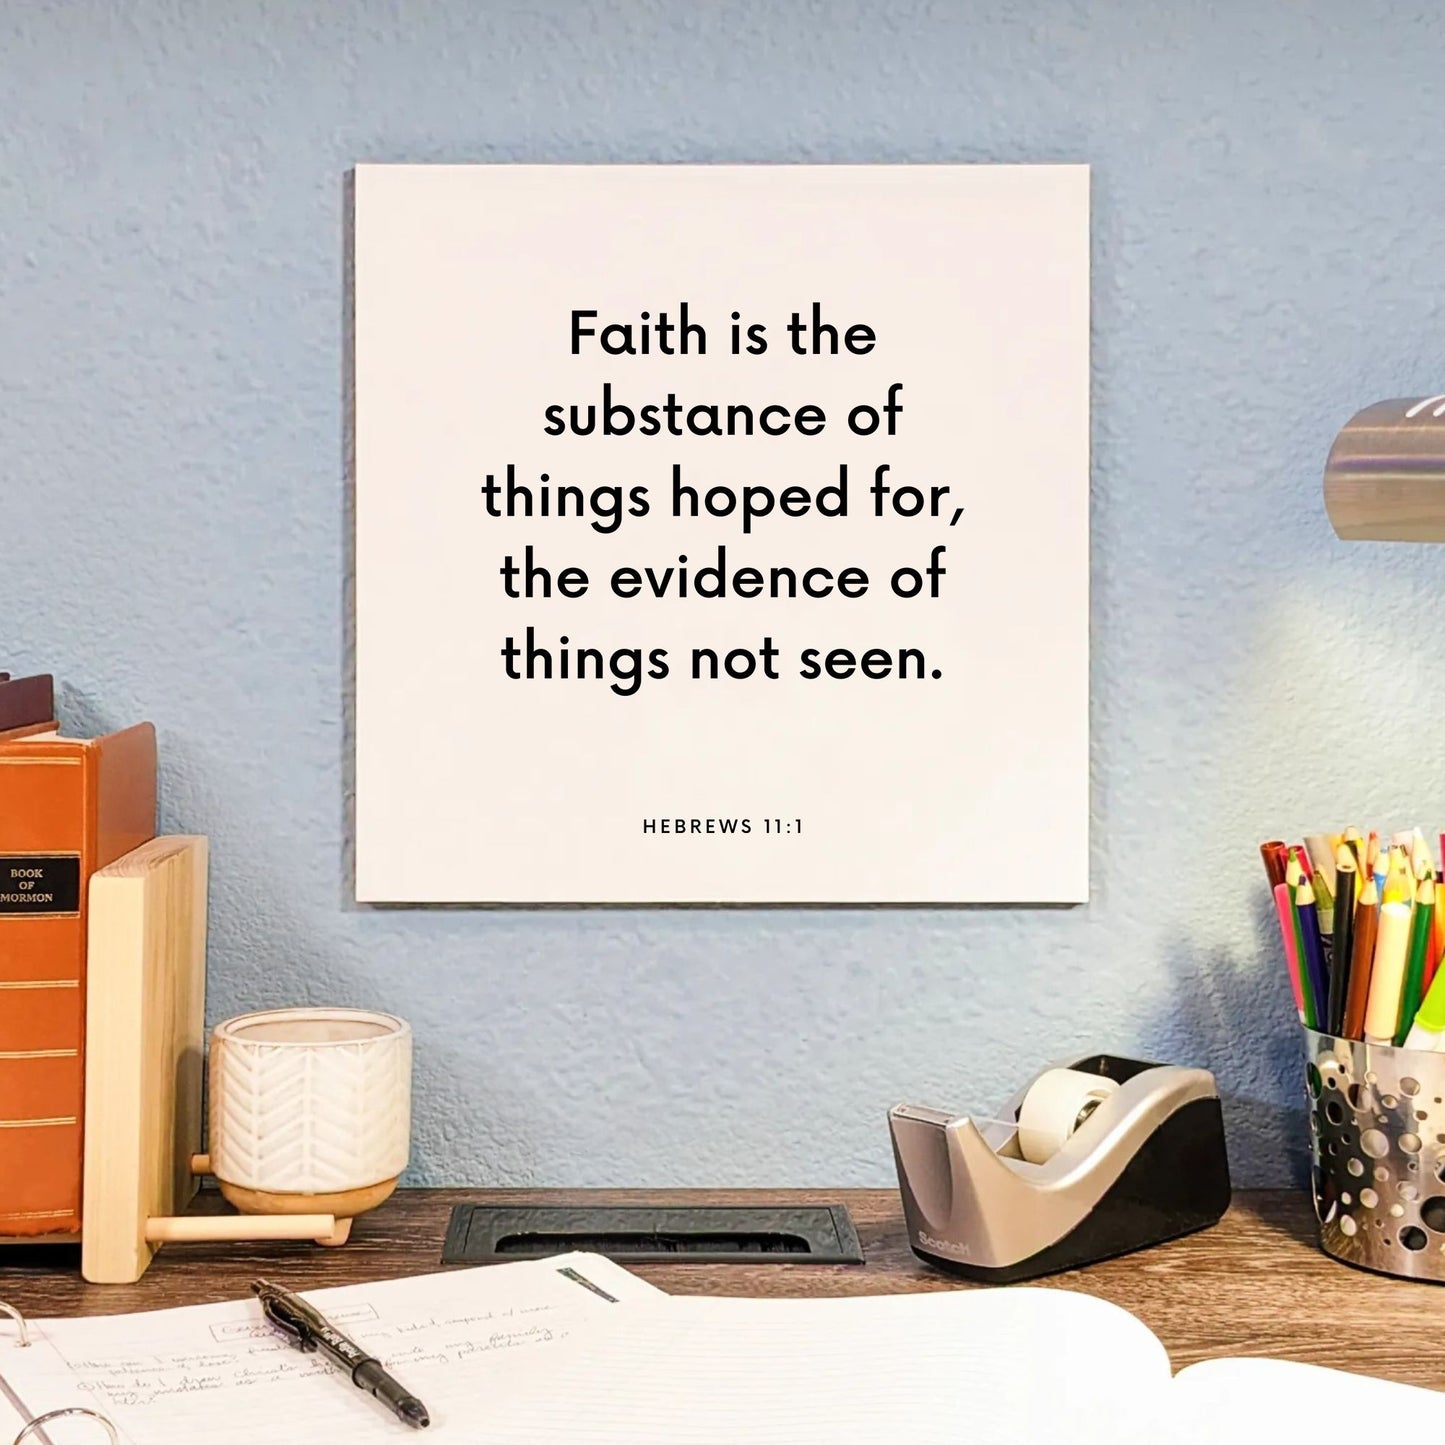 Desk mouting of the scripture tile for Hebrews 11:1 - "Faith is the substance of things hoped for"